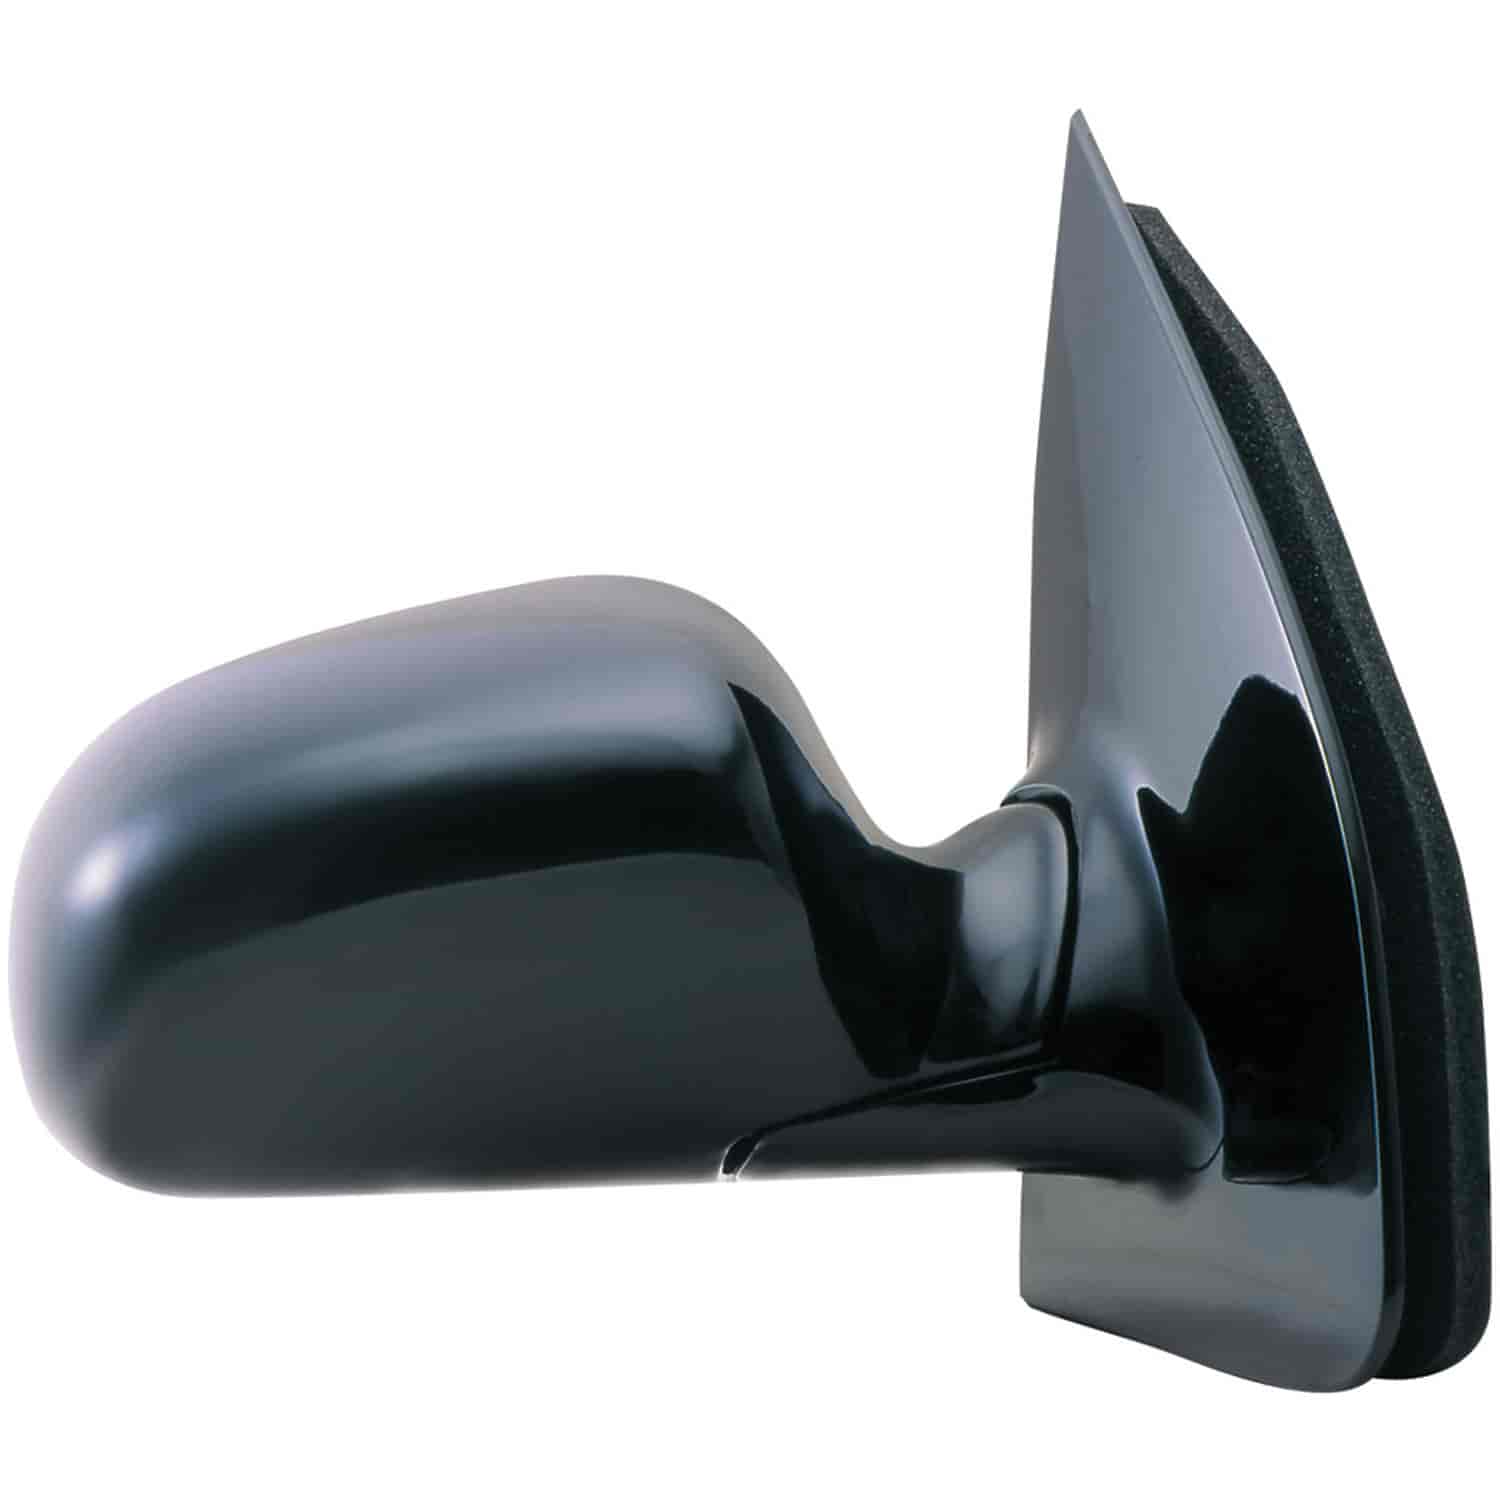 OEM Style Replacement mirror for 99-03 Ford Windstar passenger side mirror tested to fit and functio